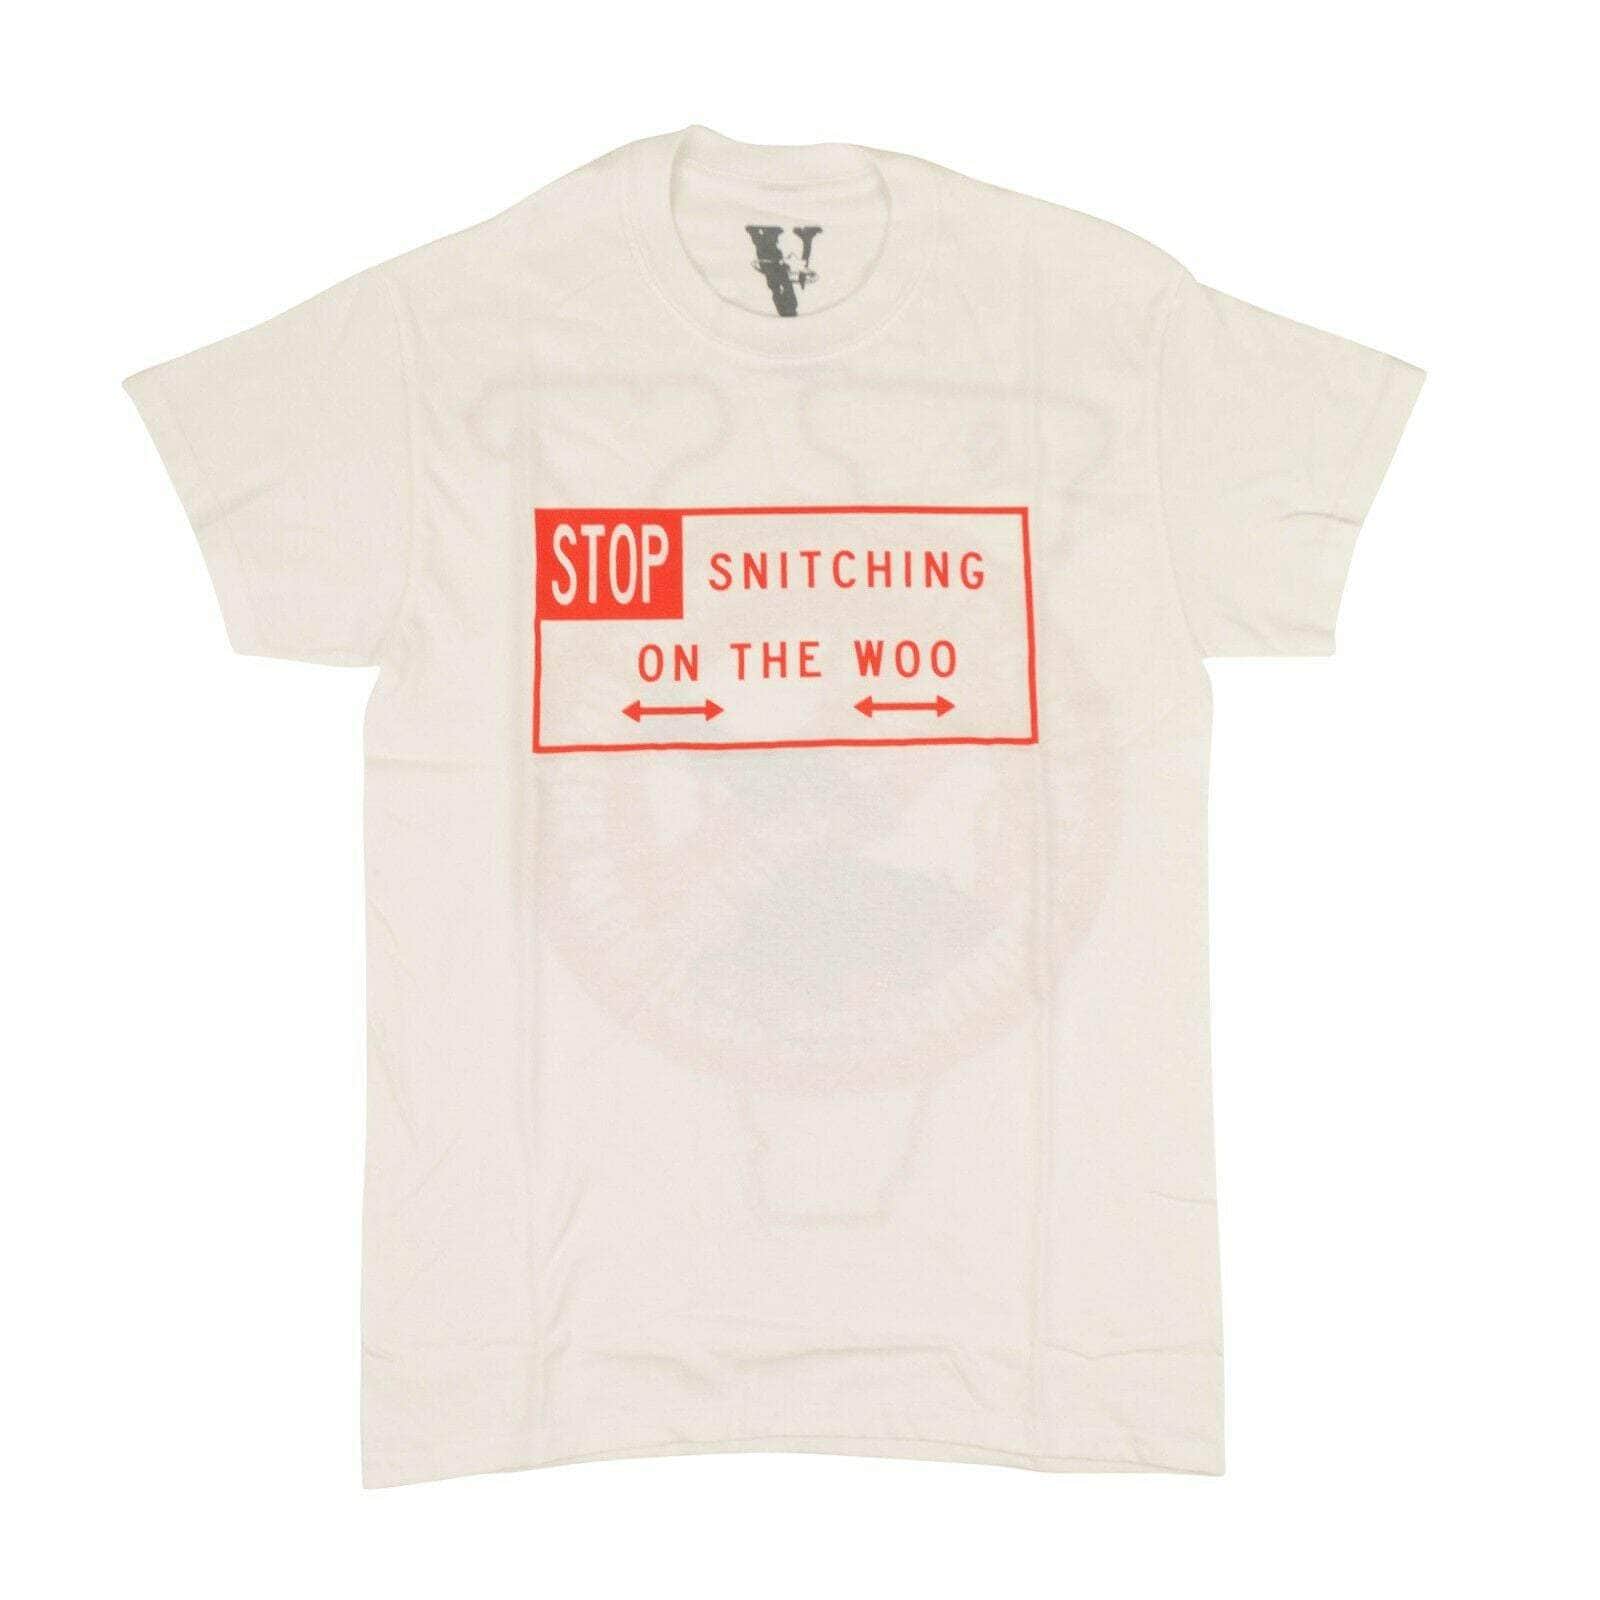 Vlone chicmi, couponcollection, gender-mens, main-clothing, mens-shoes, SPO, t-shirt, under-250, vlone XXL VLONE x POP SMOKE 'Stop Snitching' Short Sleeves T-Shirt - White/Red 75LE-1606/XXL 75LE-1606/XXL